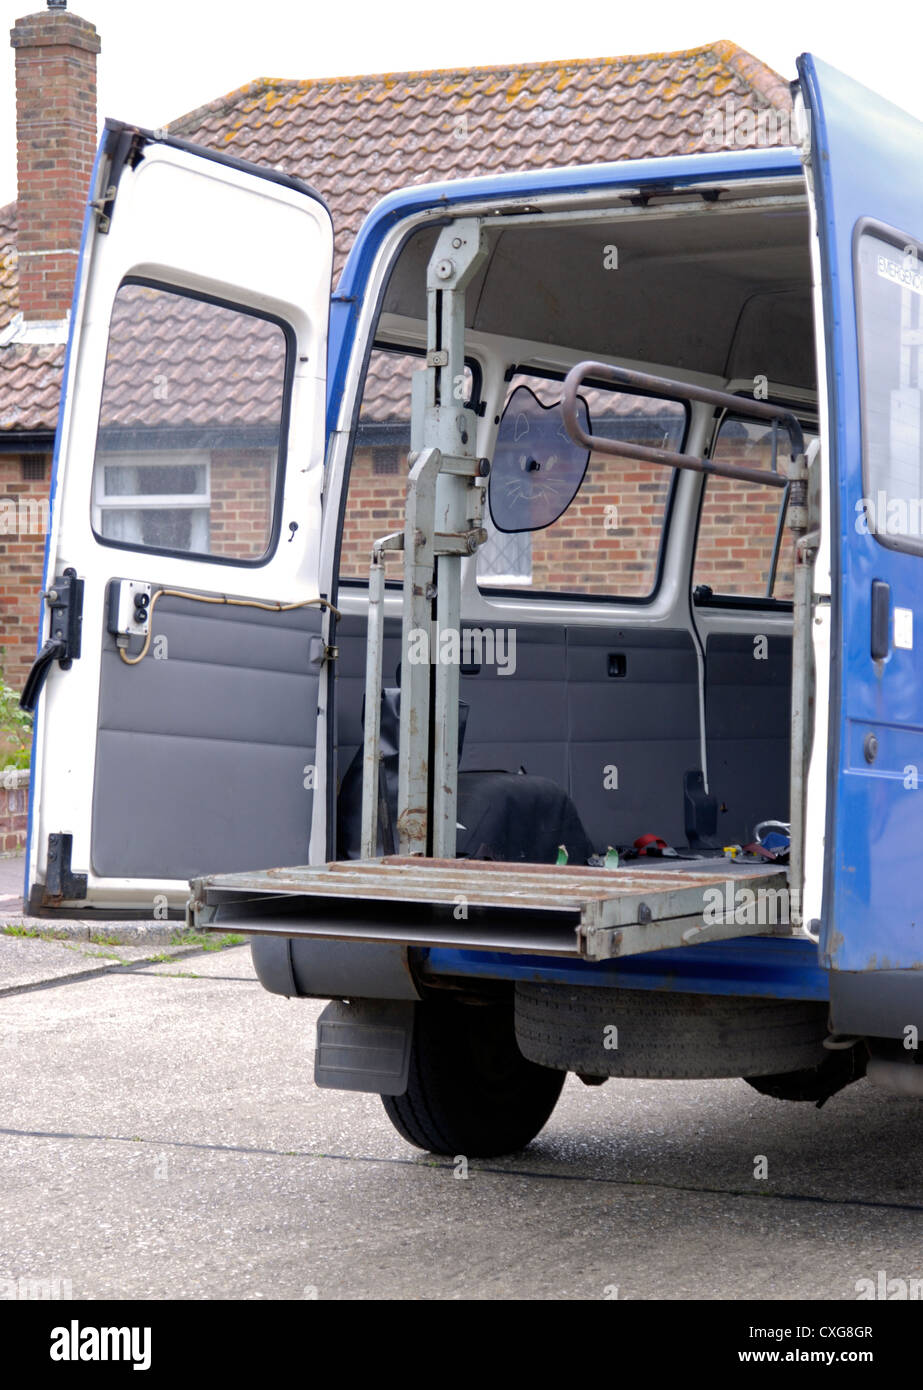 Specialised adapted vehicle voluntary service for transporting disabled people in the Sussex area Stock Photo